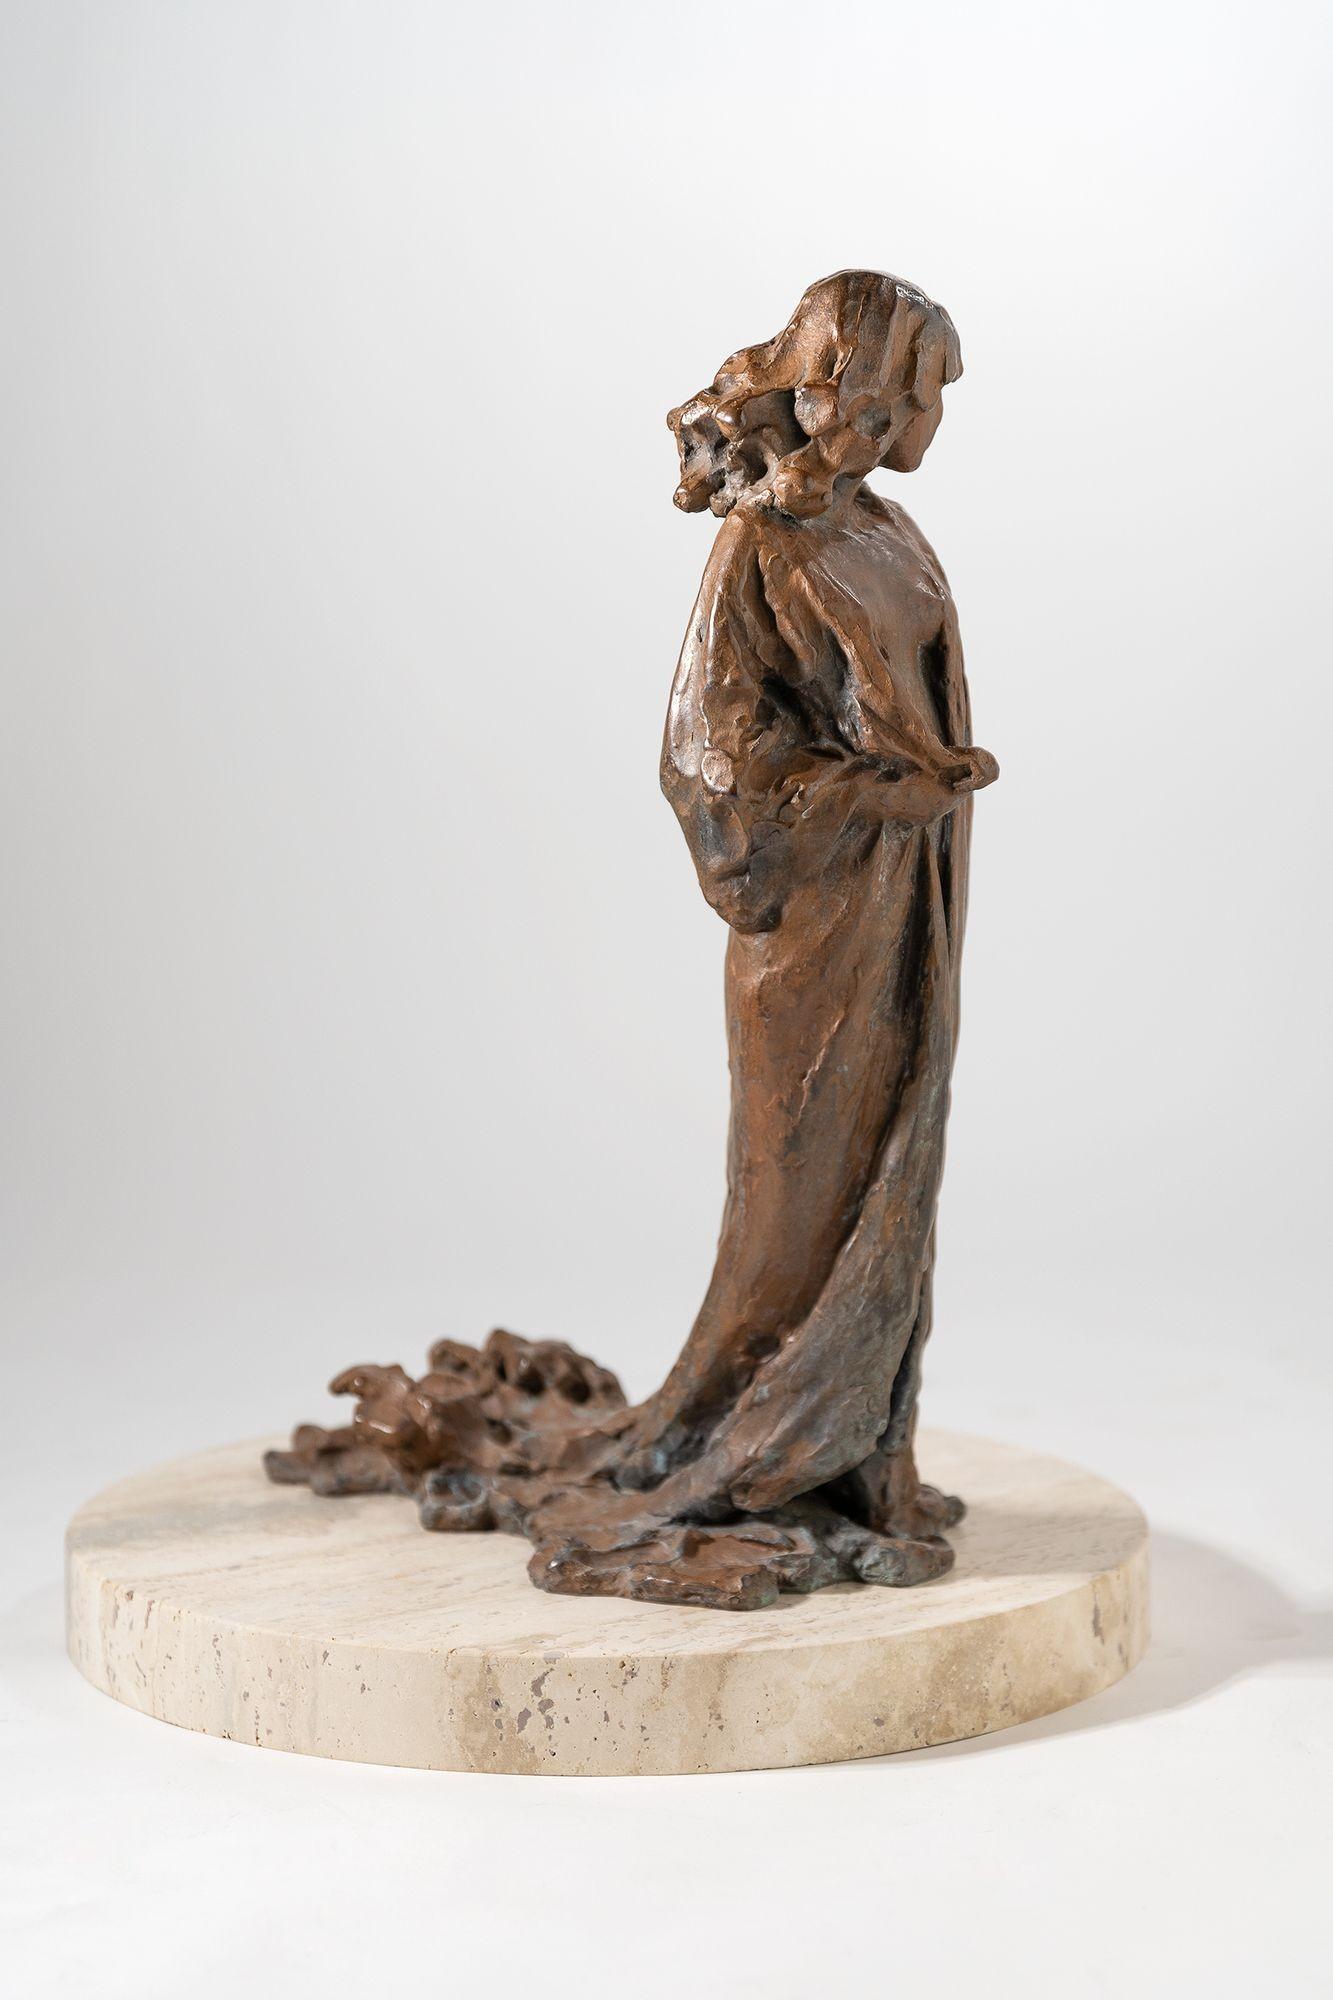 Extraordinary cast bronze Sculpture of a young woman in a flowing gown on a solid travertine base dated 1964. This was from a private collection in Rancho Mirage California.

Paul Suttman was a sculptor best known for Impressionistic figurative